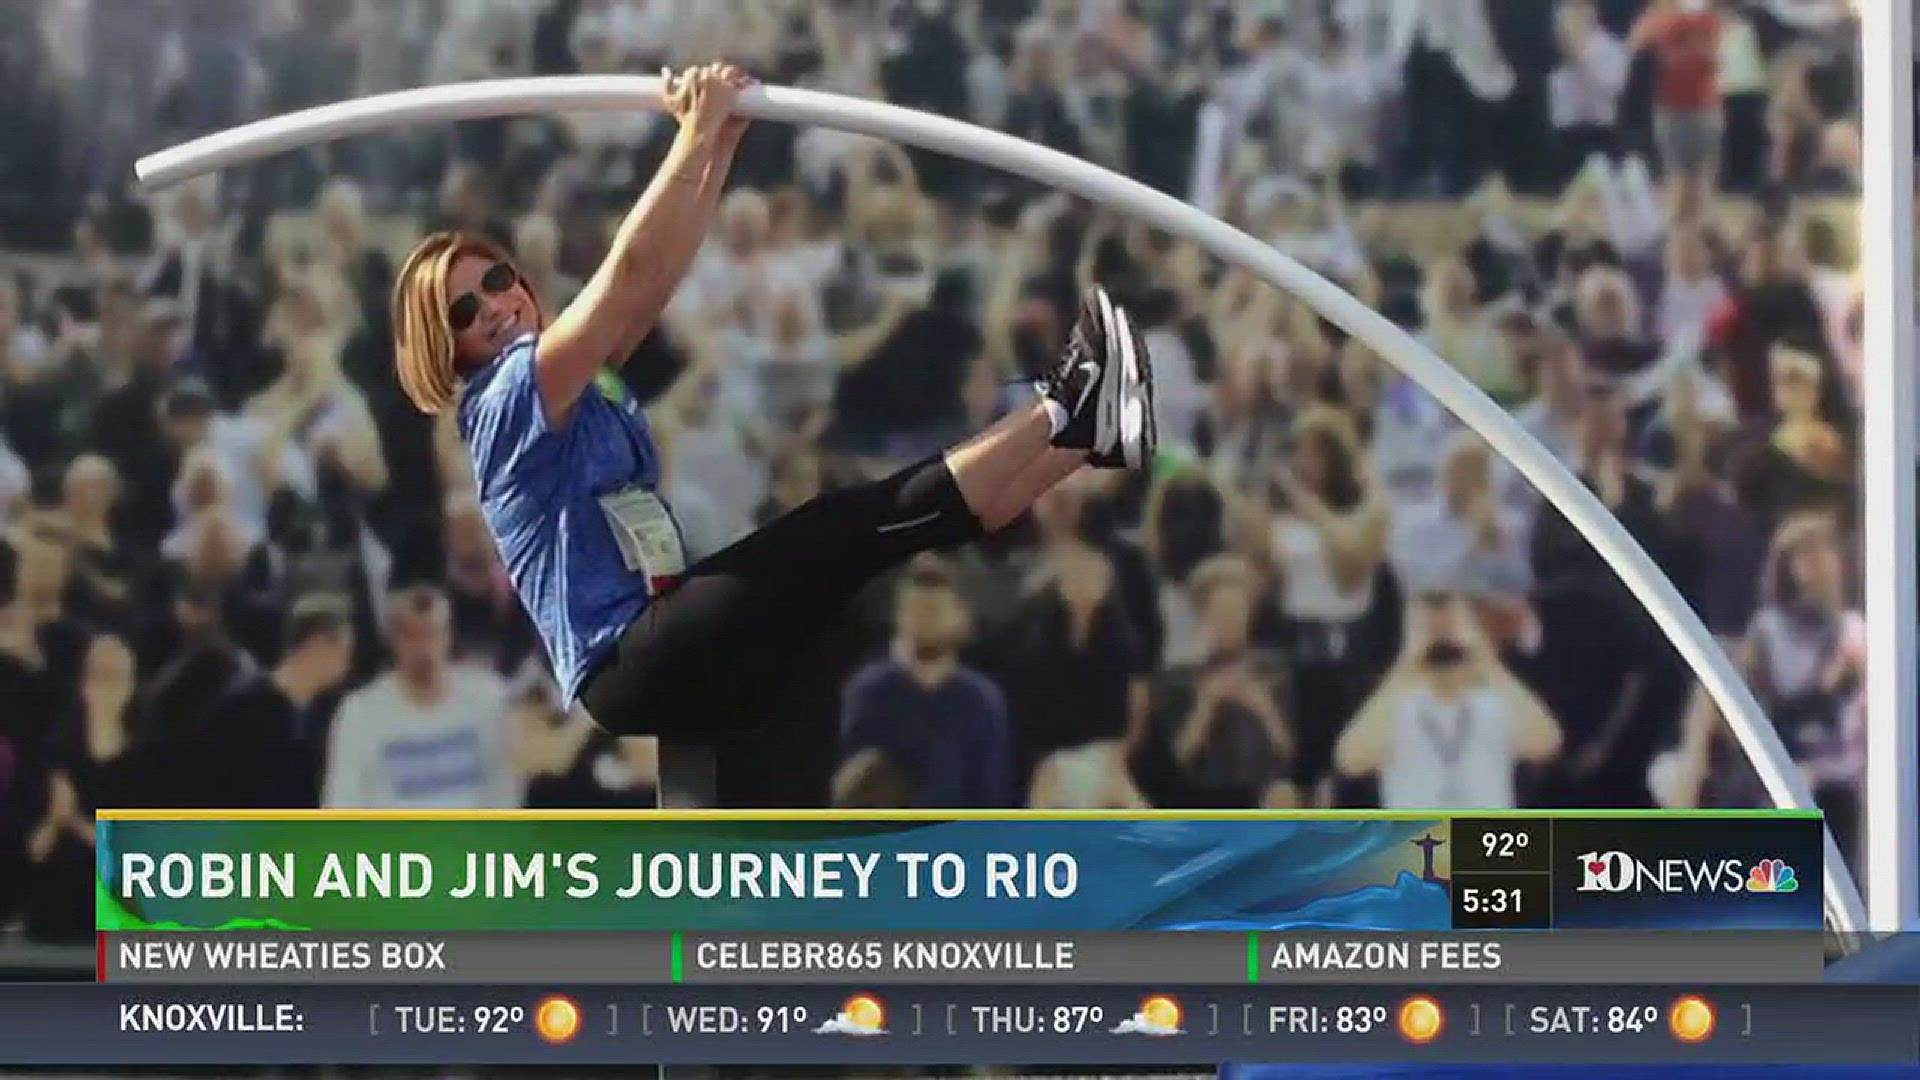 Interview with Robin and Jim on their adventures reporting the 2016 Olympic games in Rio de Janeiro, Brazil.